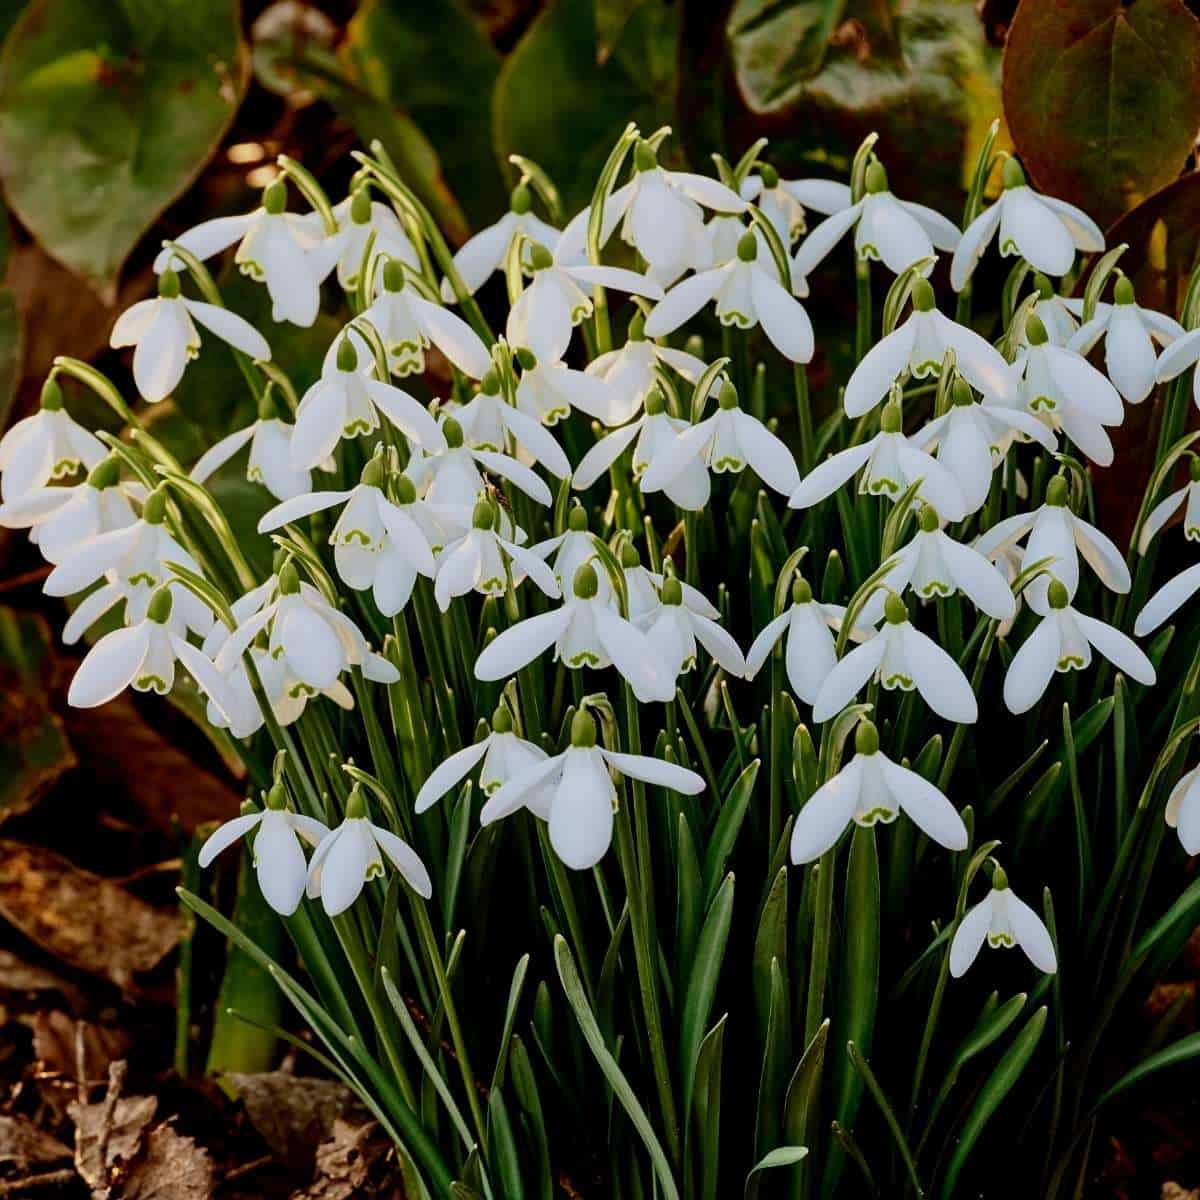 snowdrops returning at winter's end